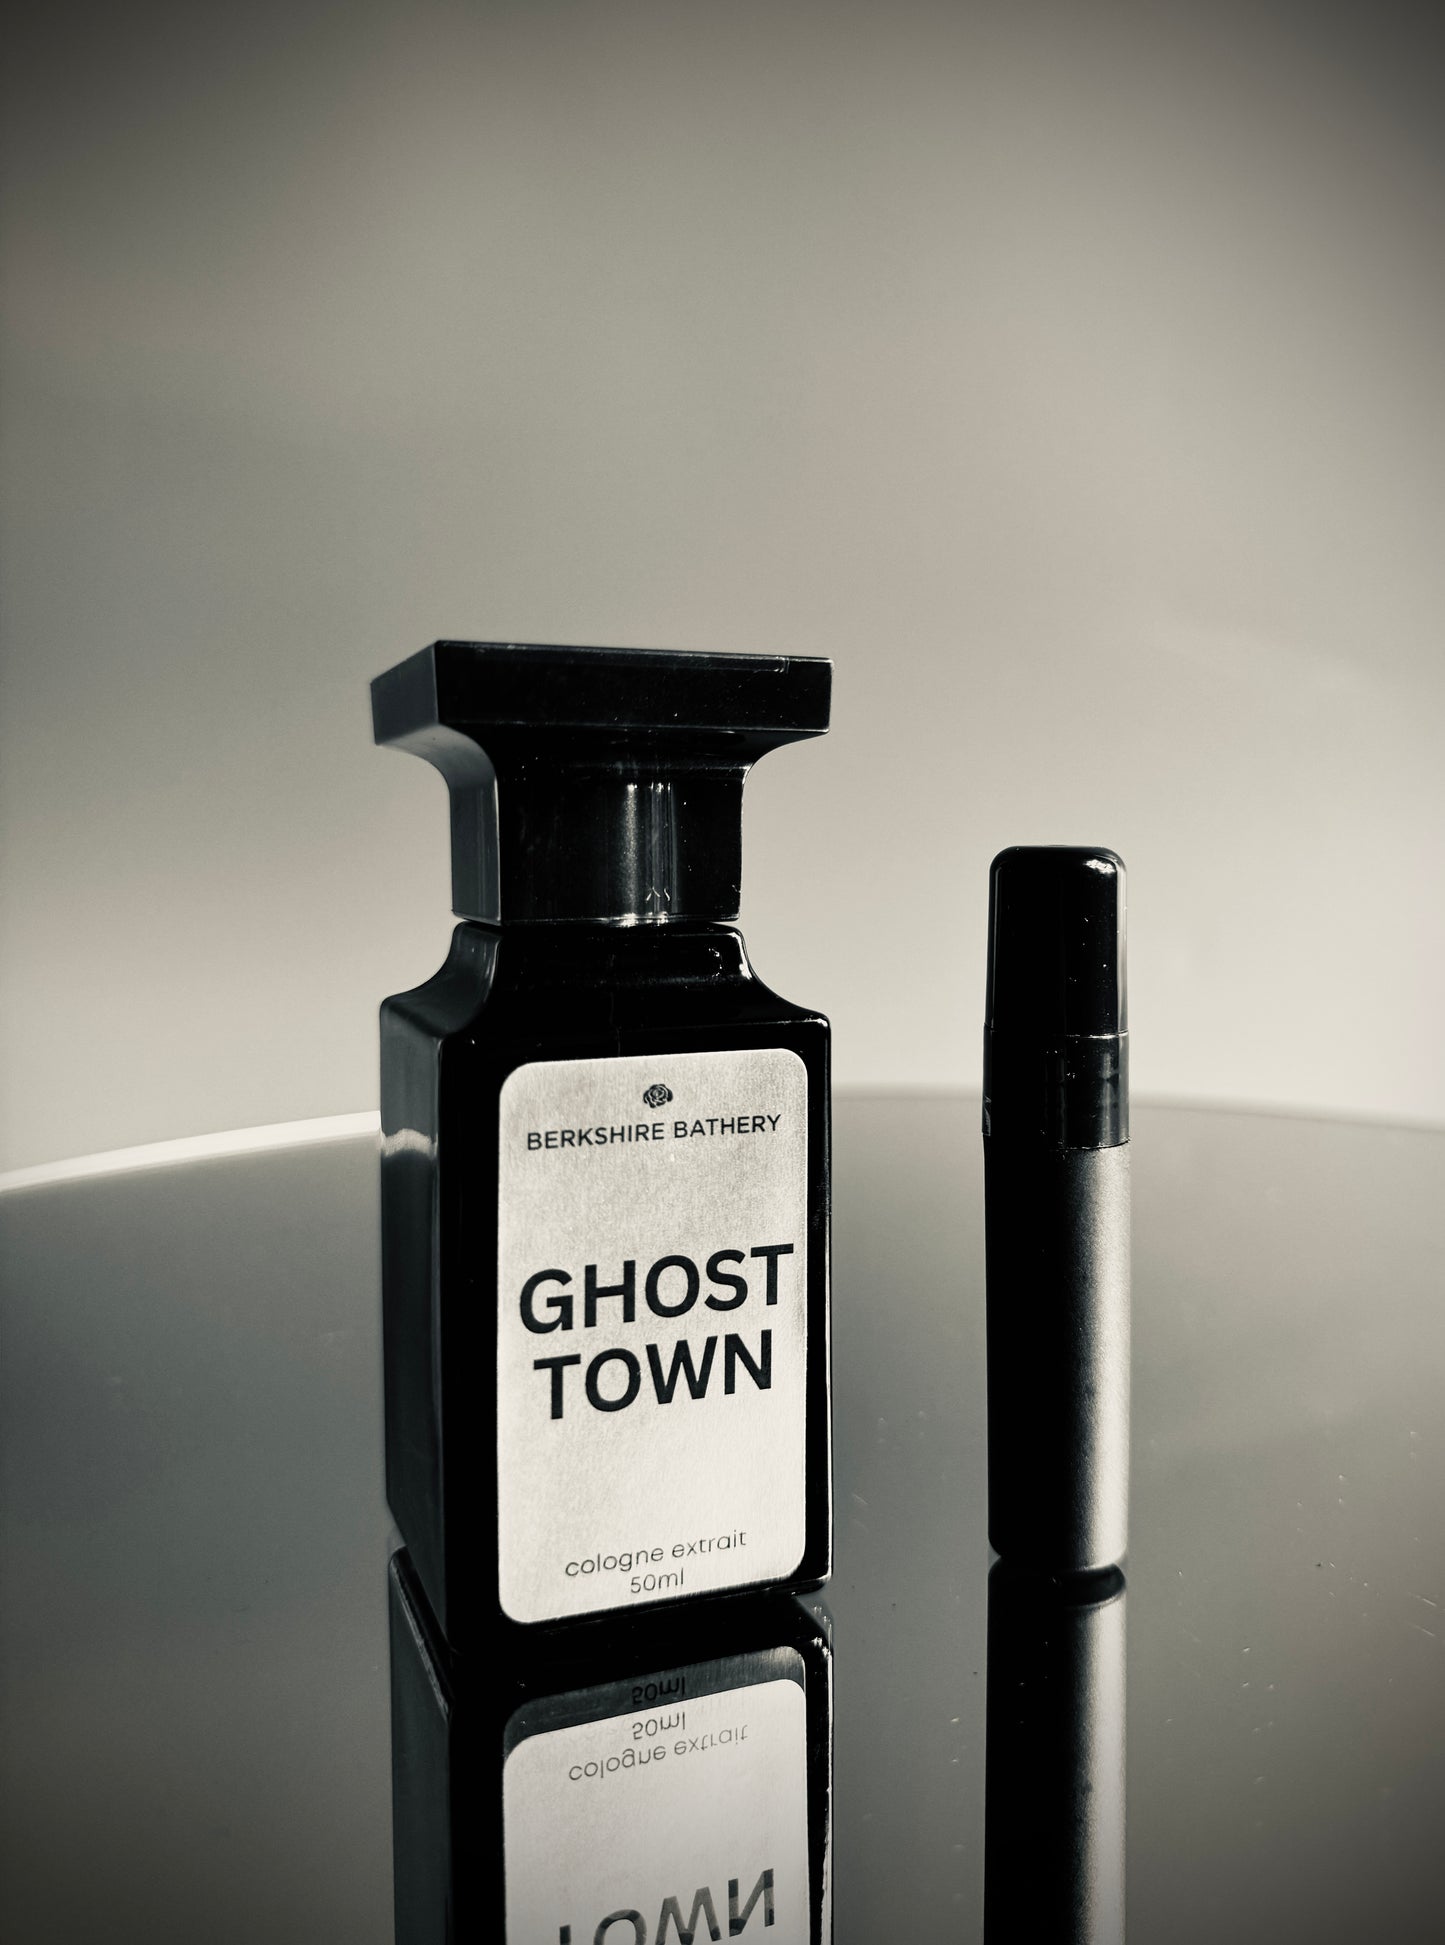 GHOST TOWN | Woody + Animalic + Floral - 5ml Cologne Extrait Sample